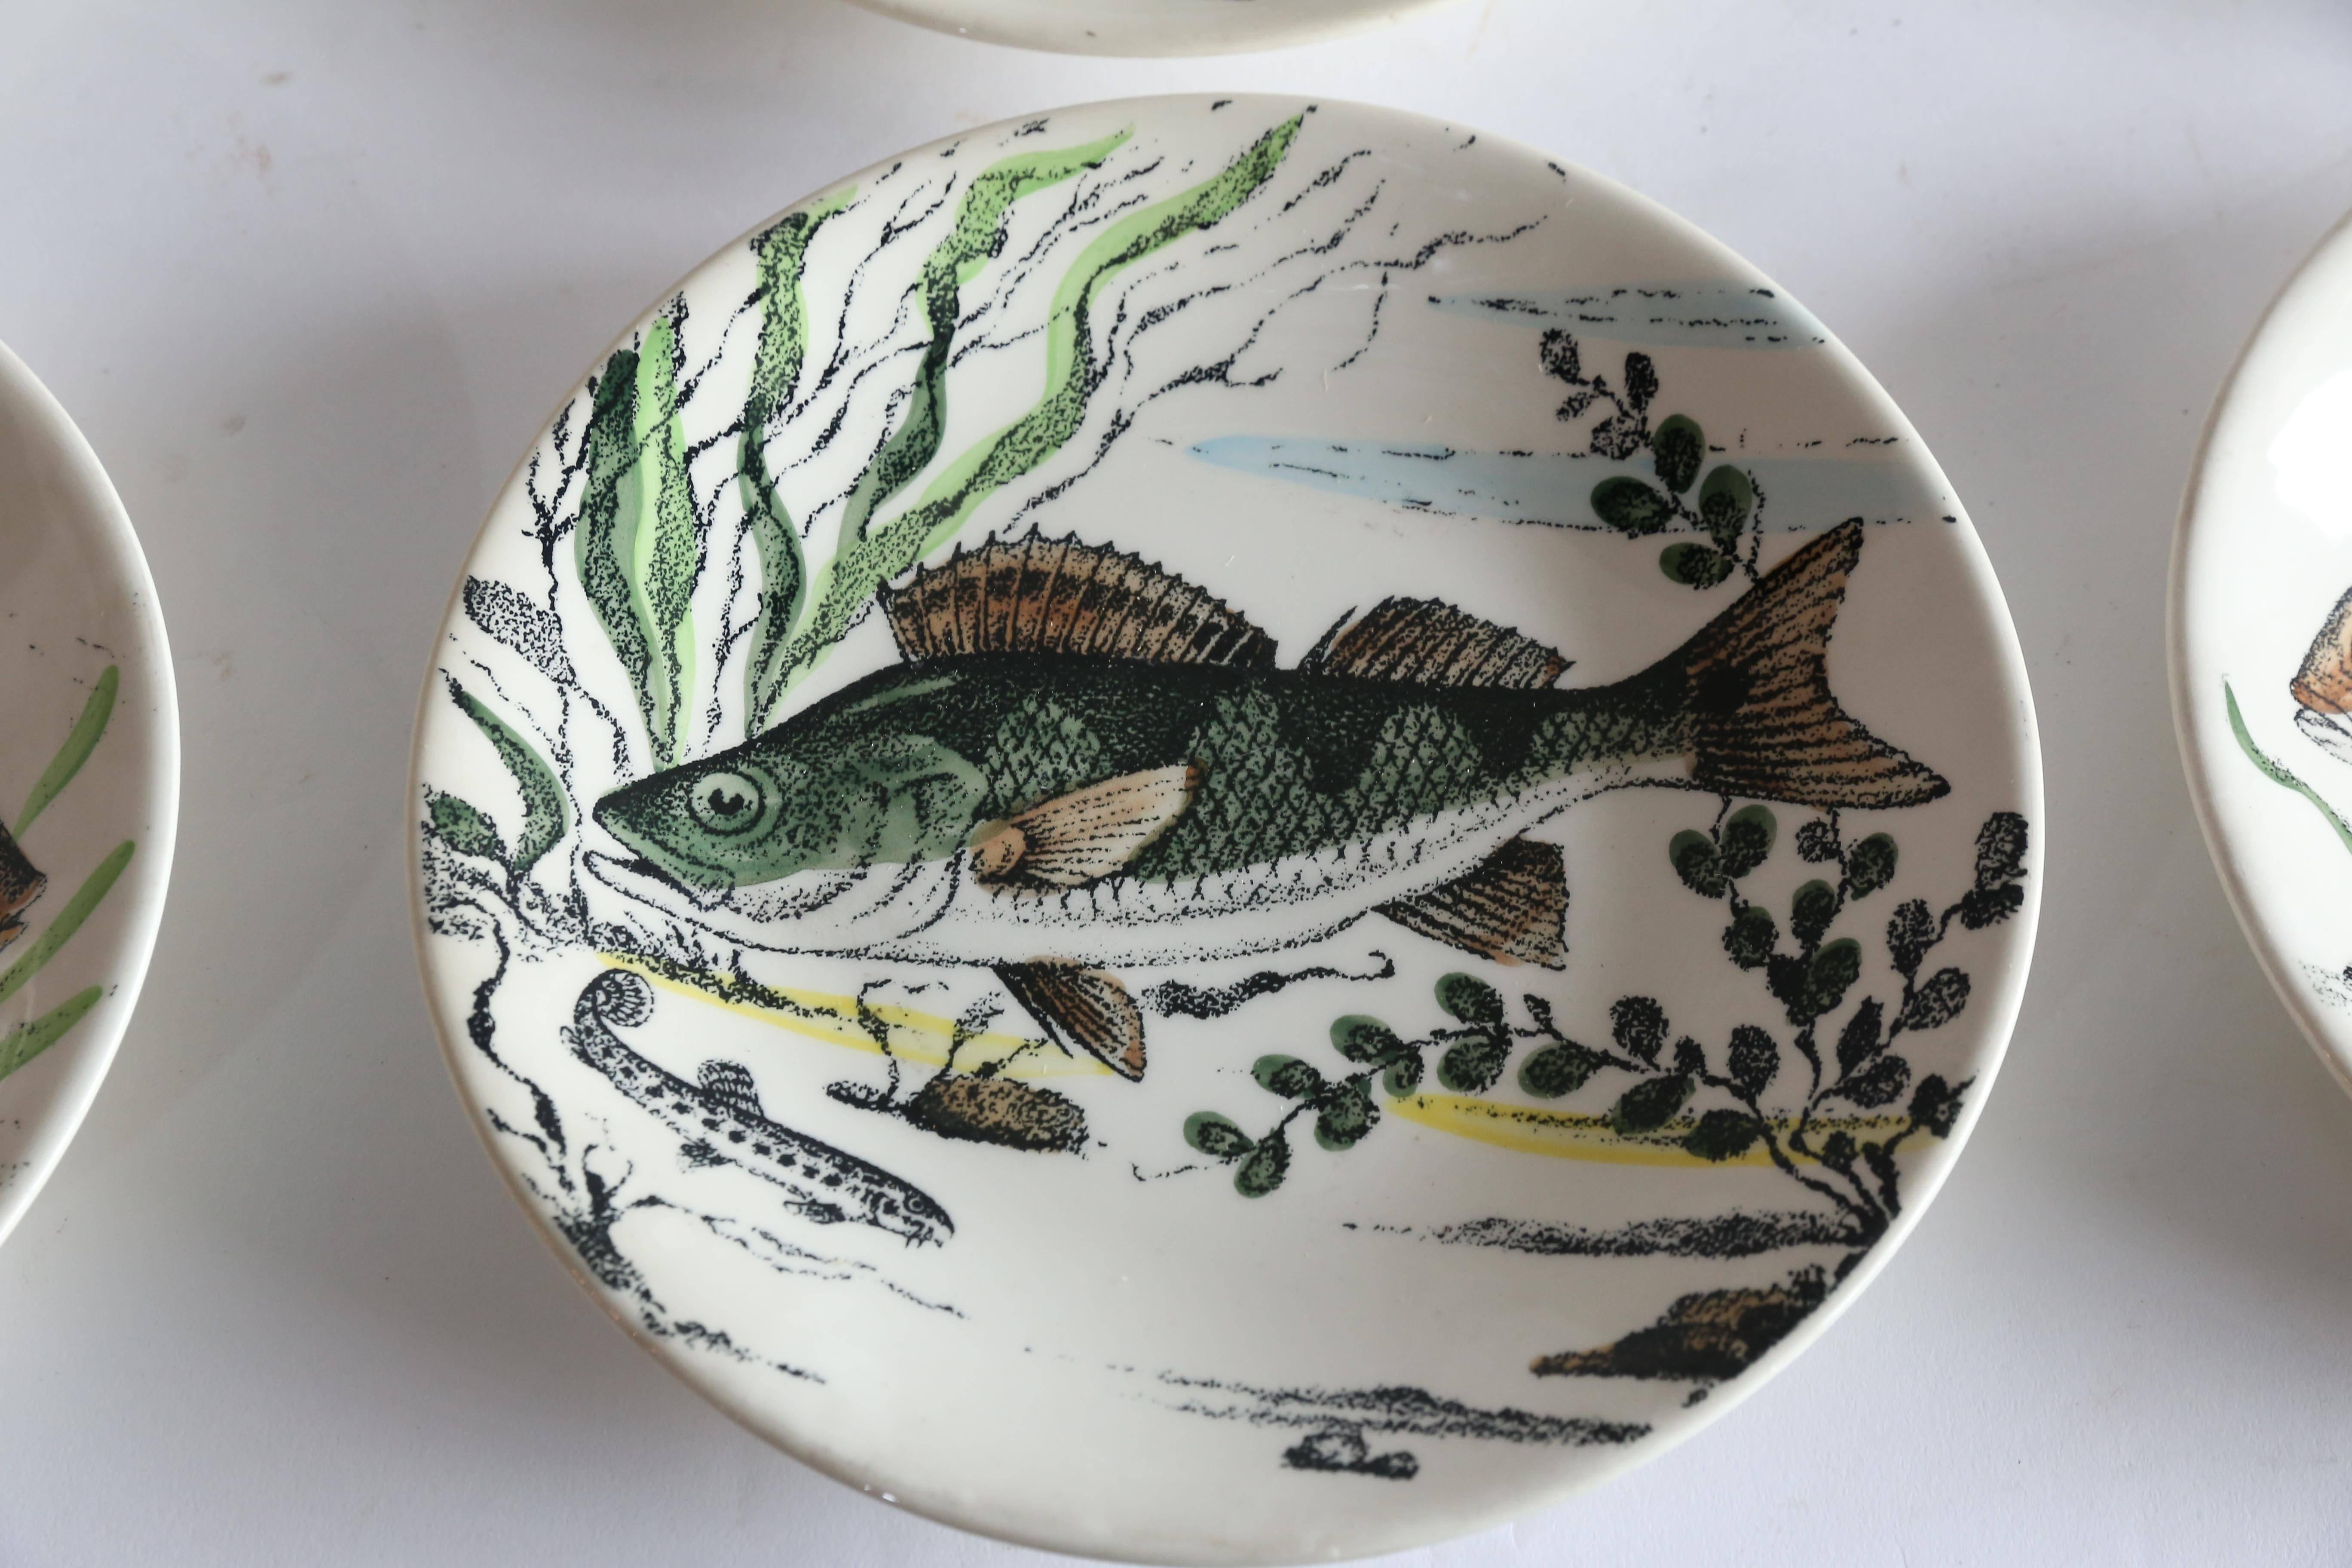 Six river fish, two of each, swim on the surface of this 12-piece set of plates from Gien of France. Charming and fun. Dishwasher safe.